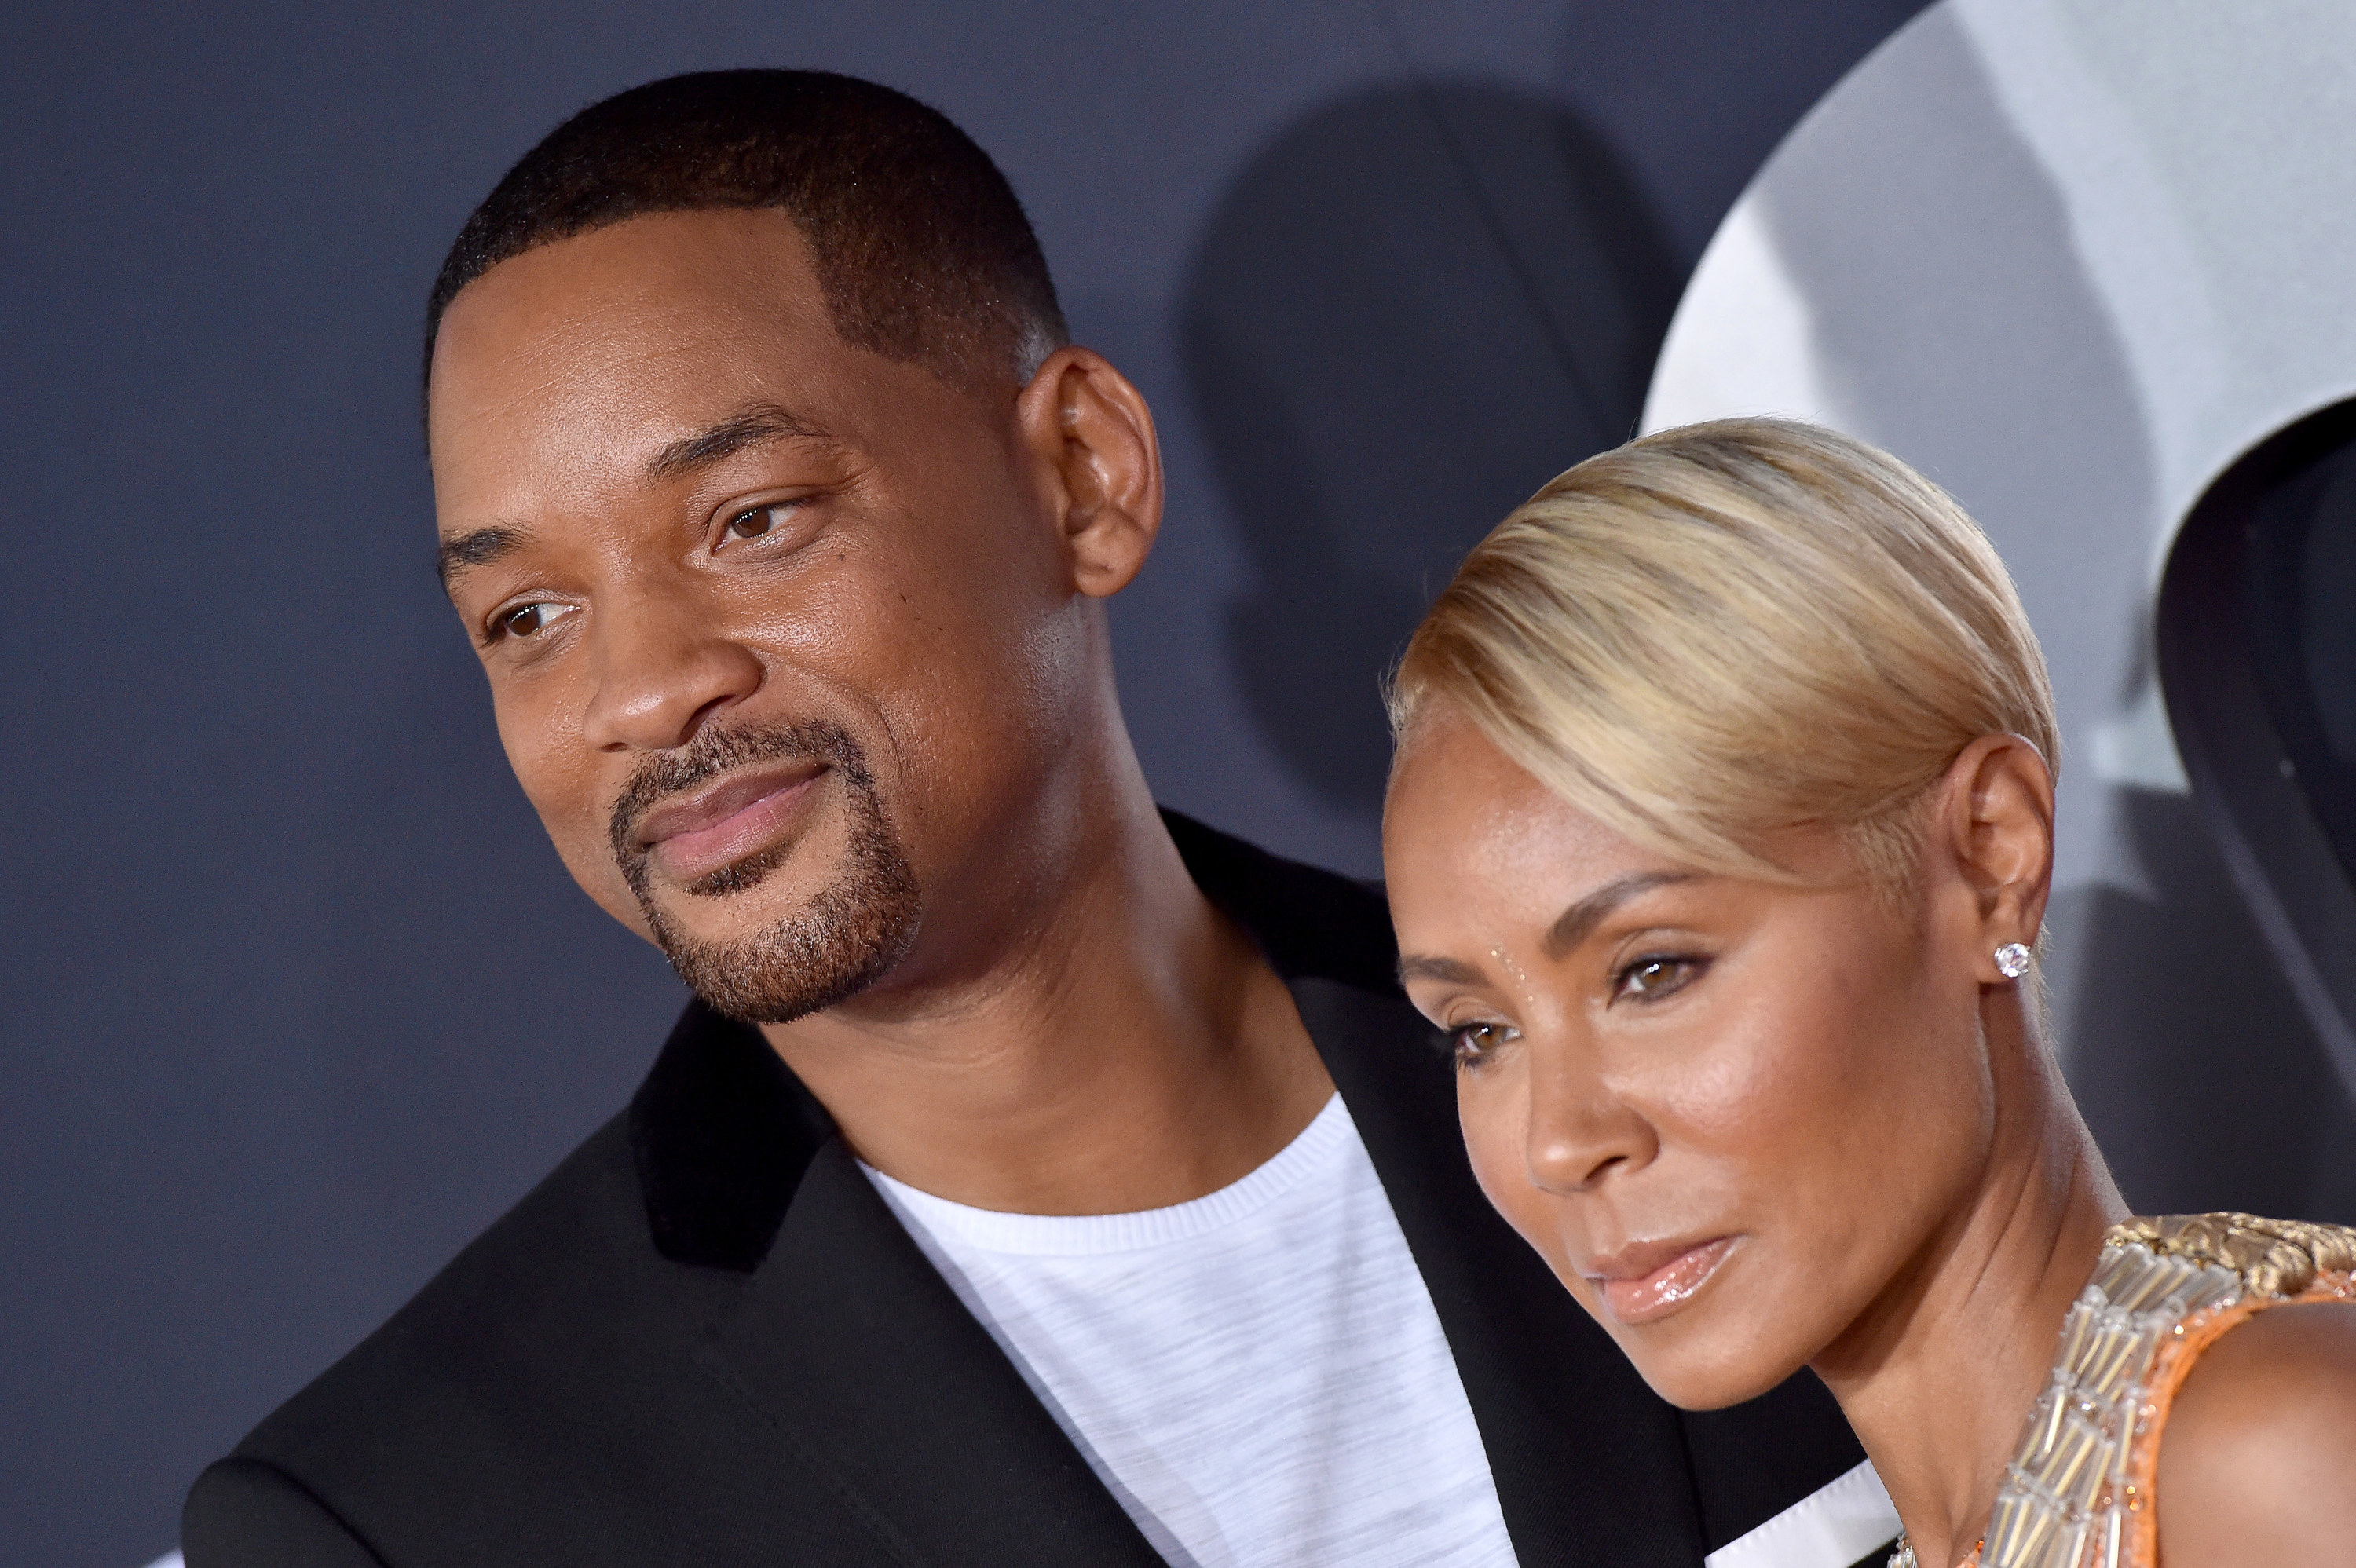 will smith dating other women